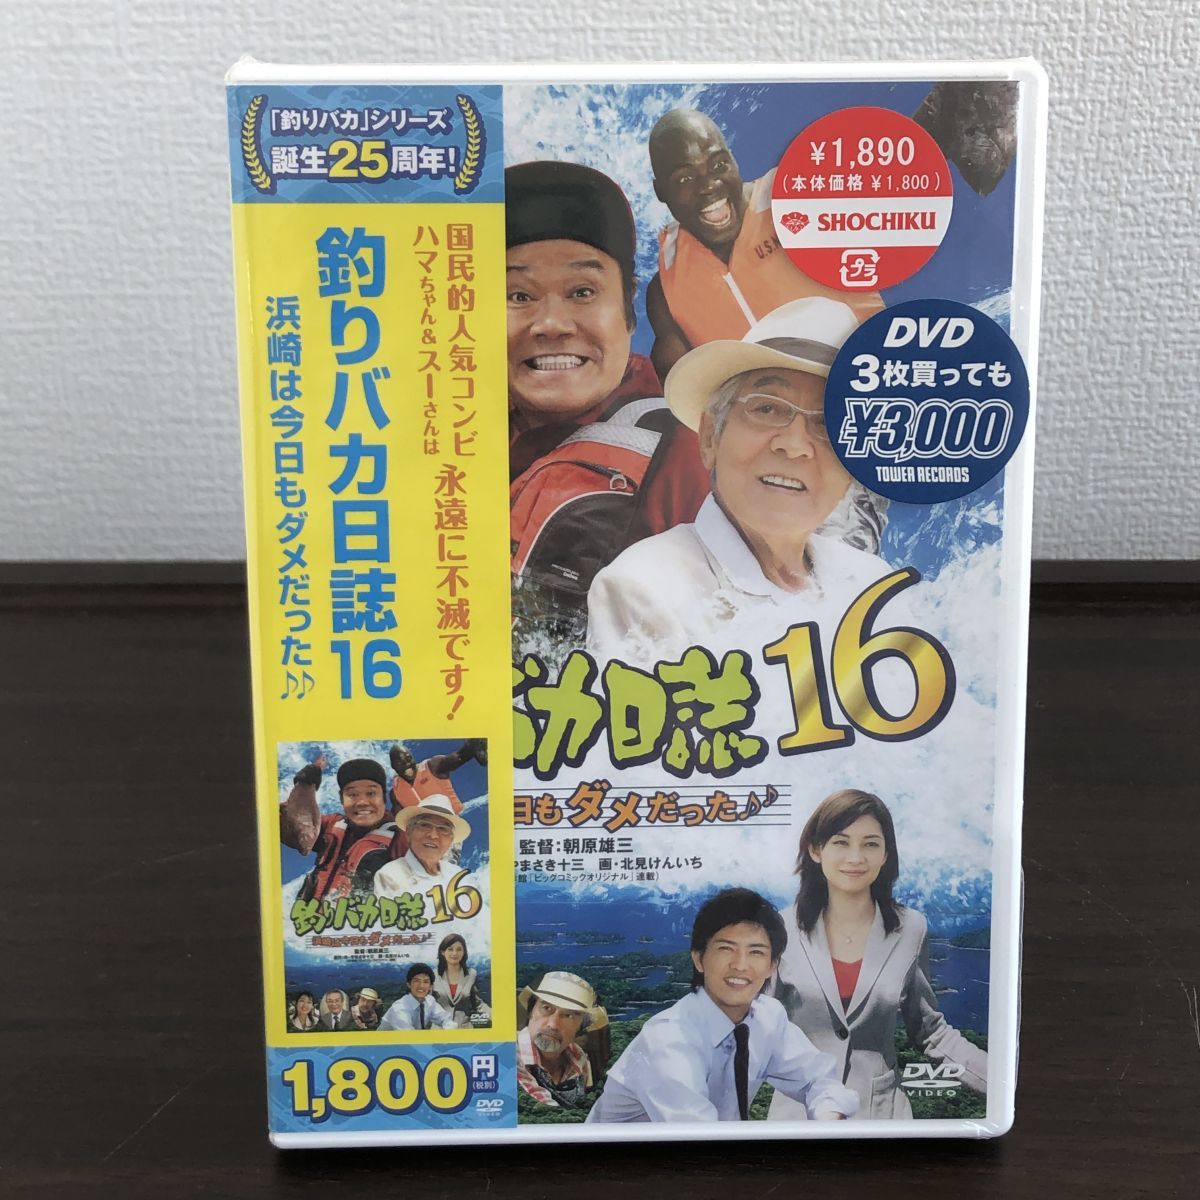  new goods unopened DVD fishing baka day magazine 16. cape is now day .dame was 